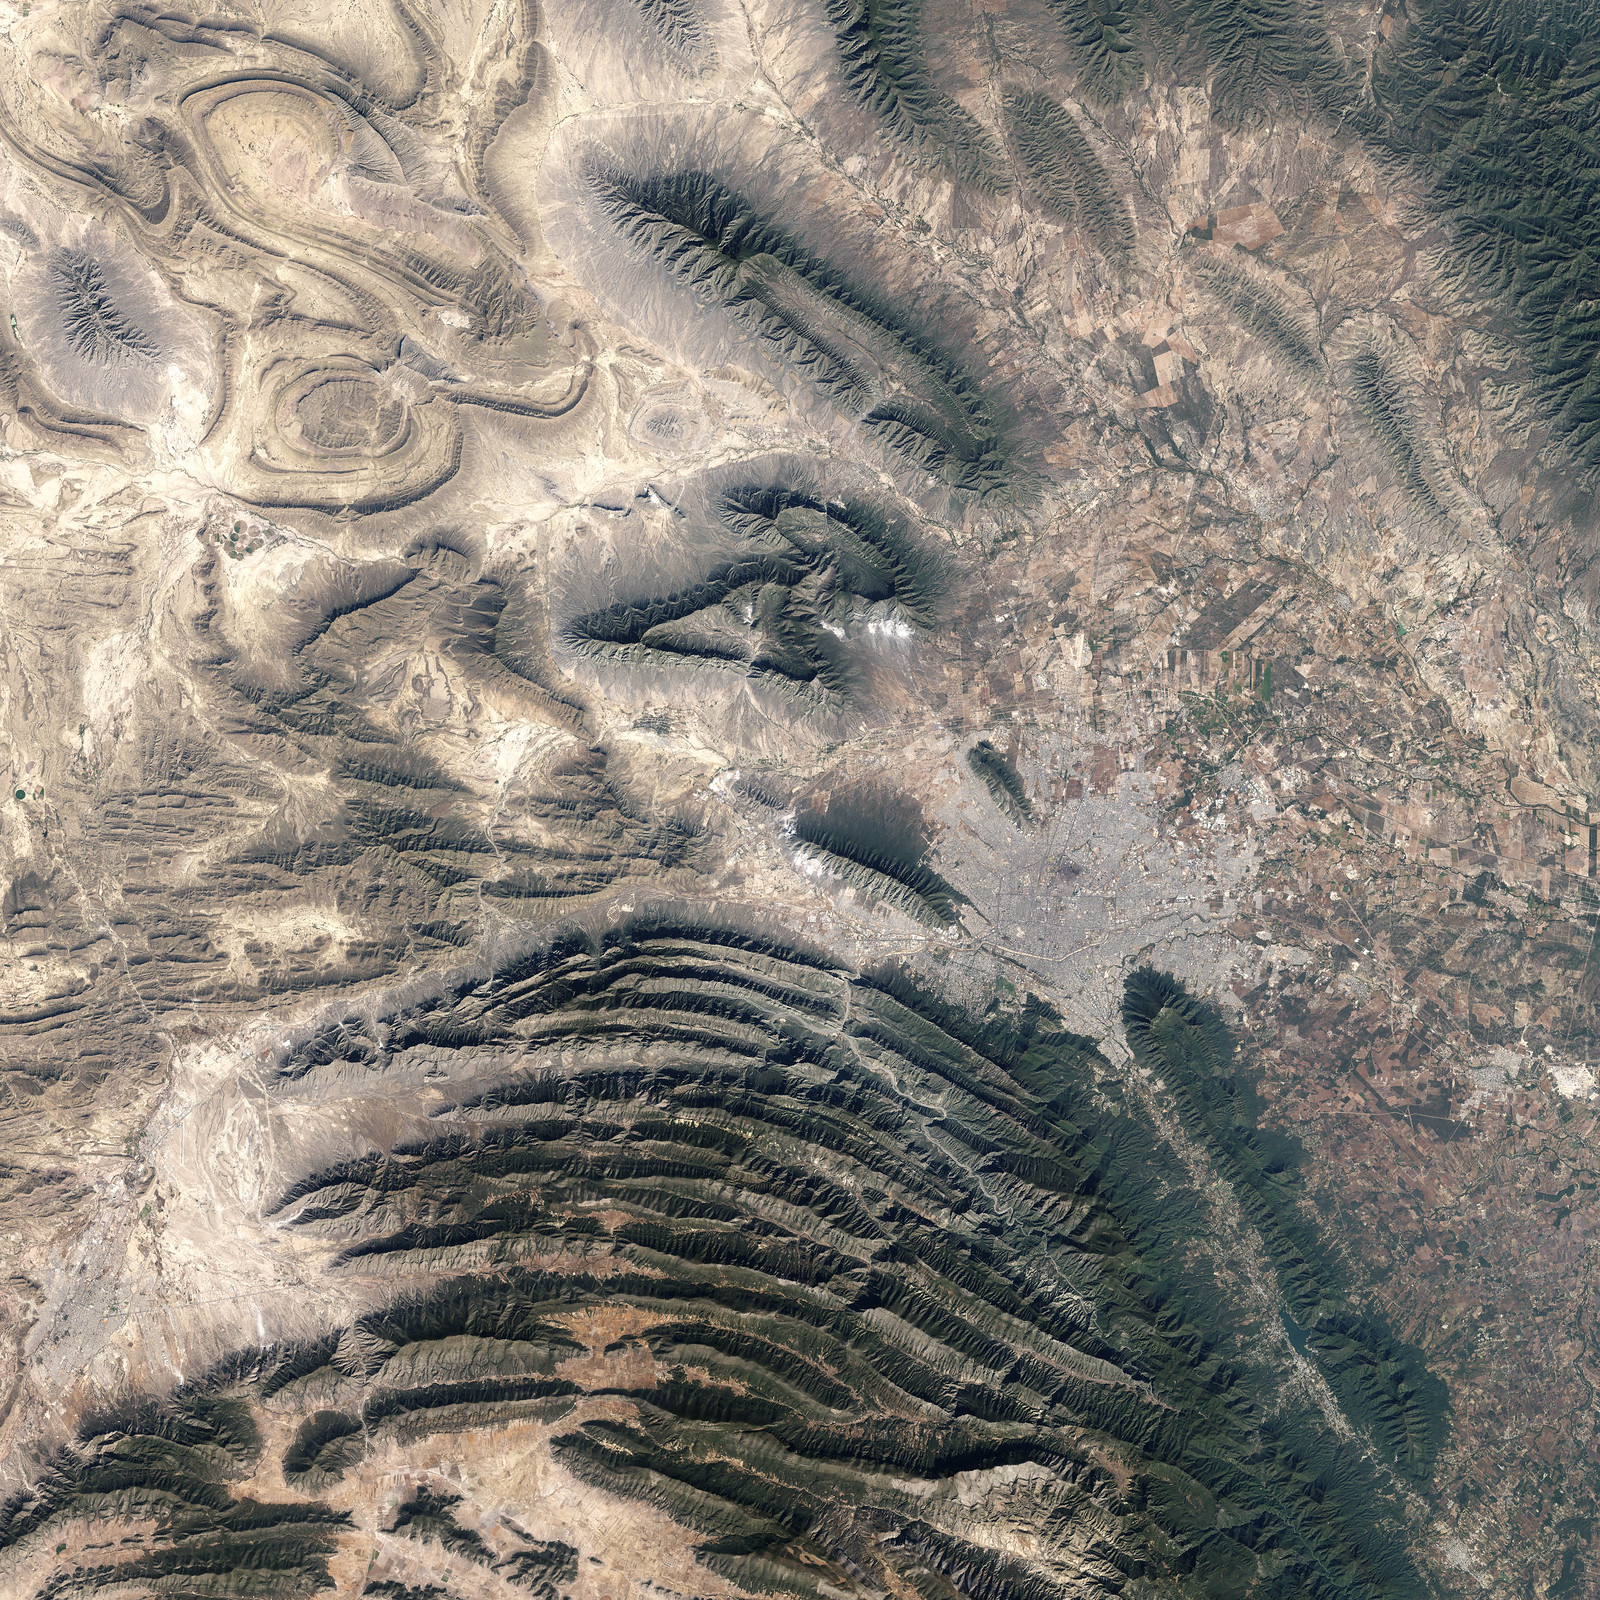 Earth from Space: Monterrey, Mexico, by NASA